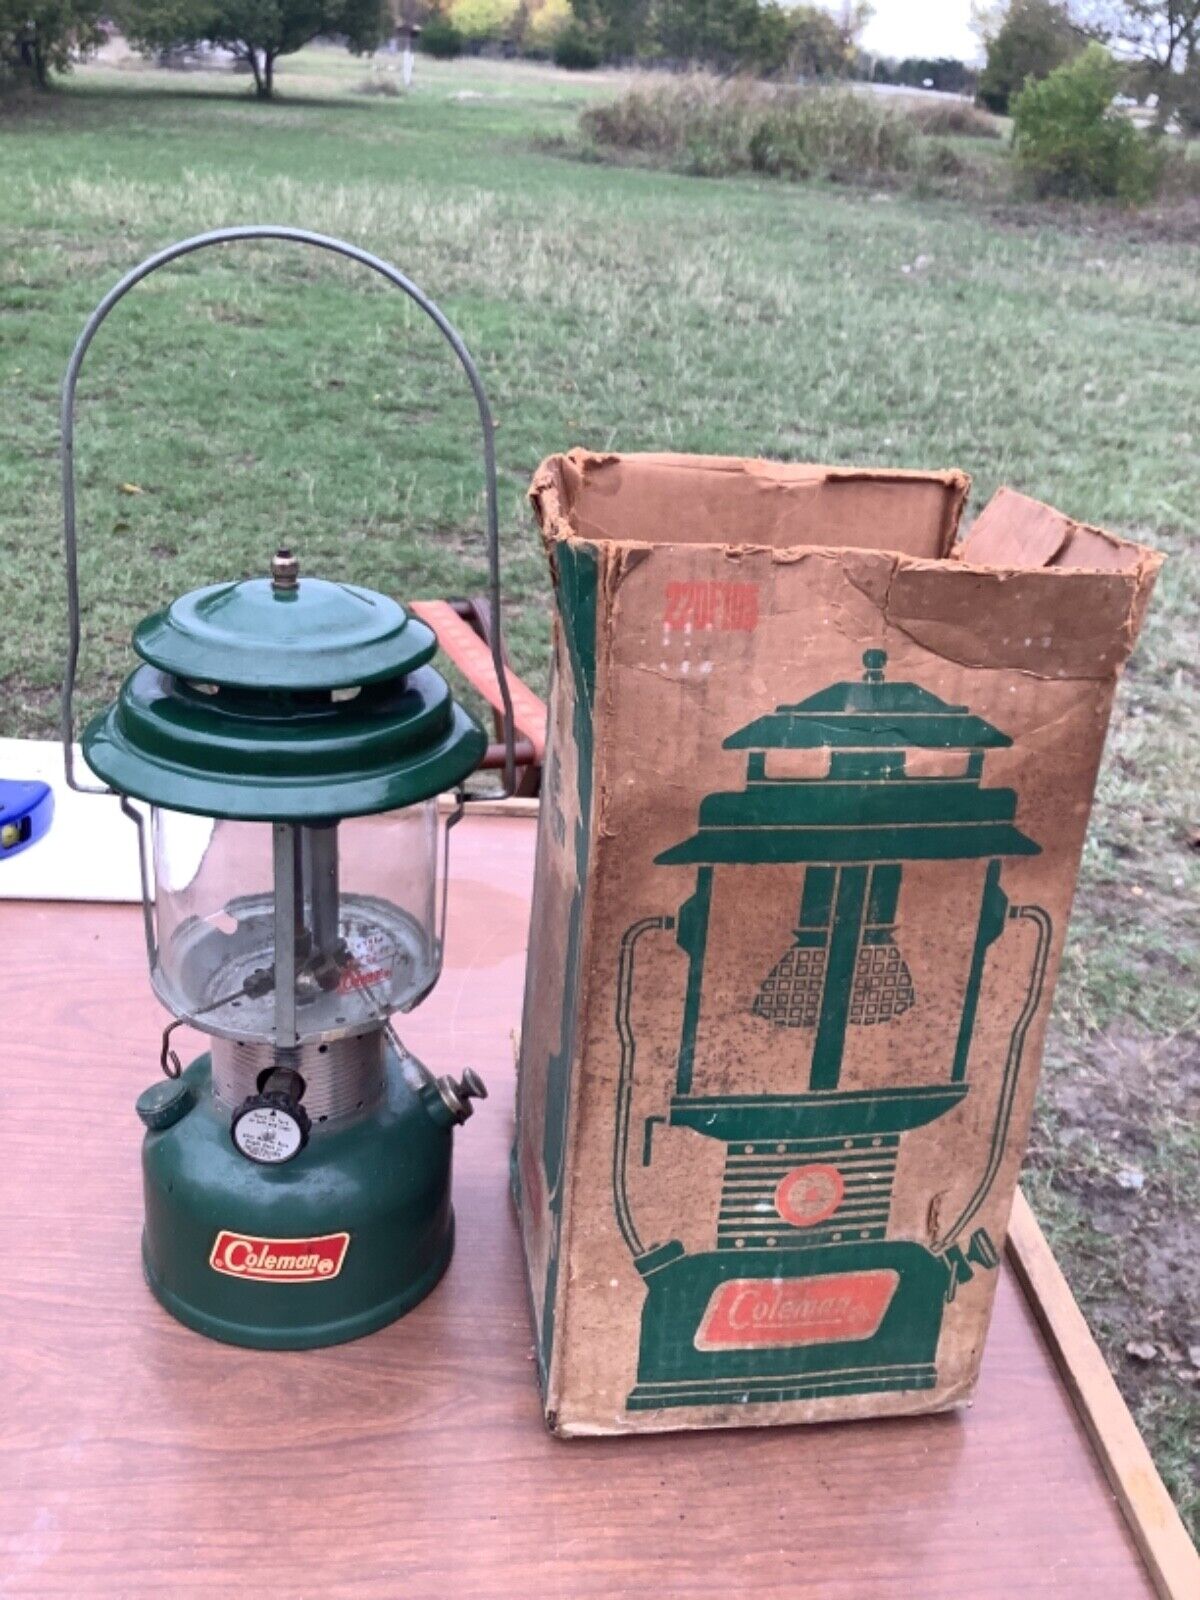 Vintage Coleman Lantern Model 220F195 dated 1971 with box camping